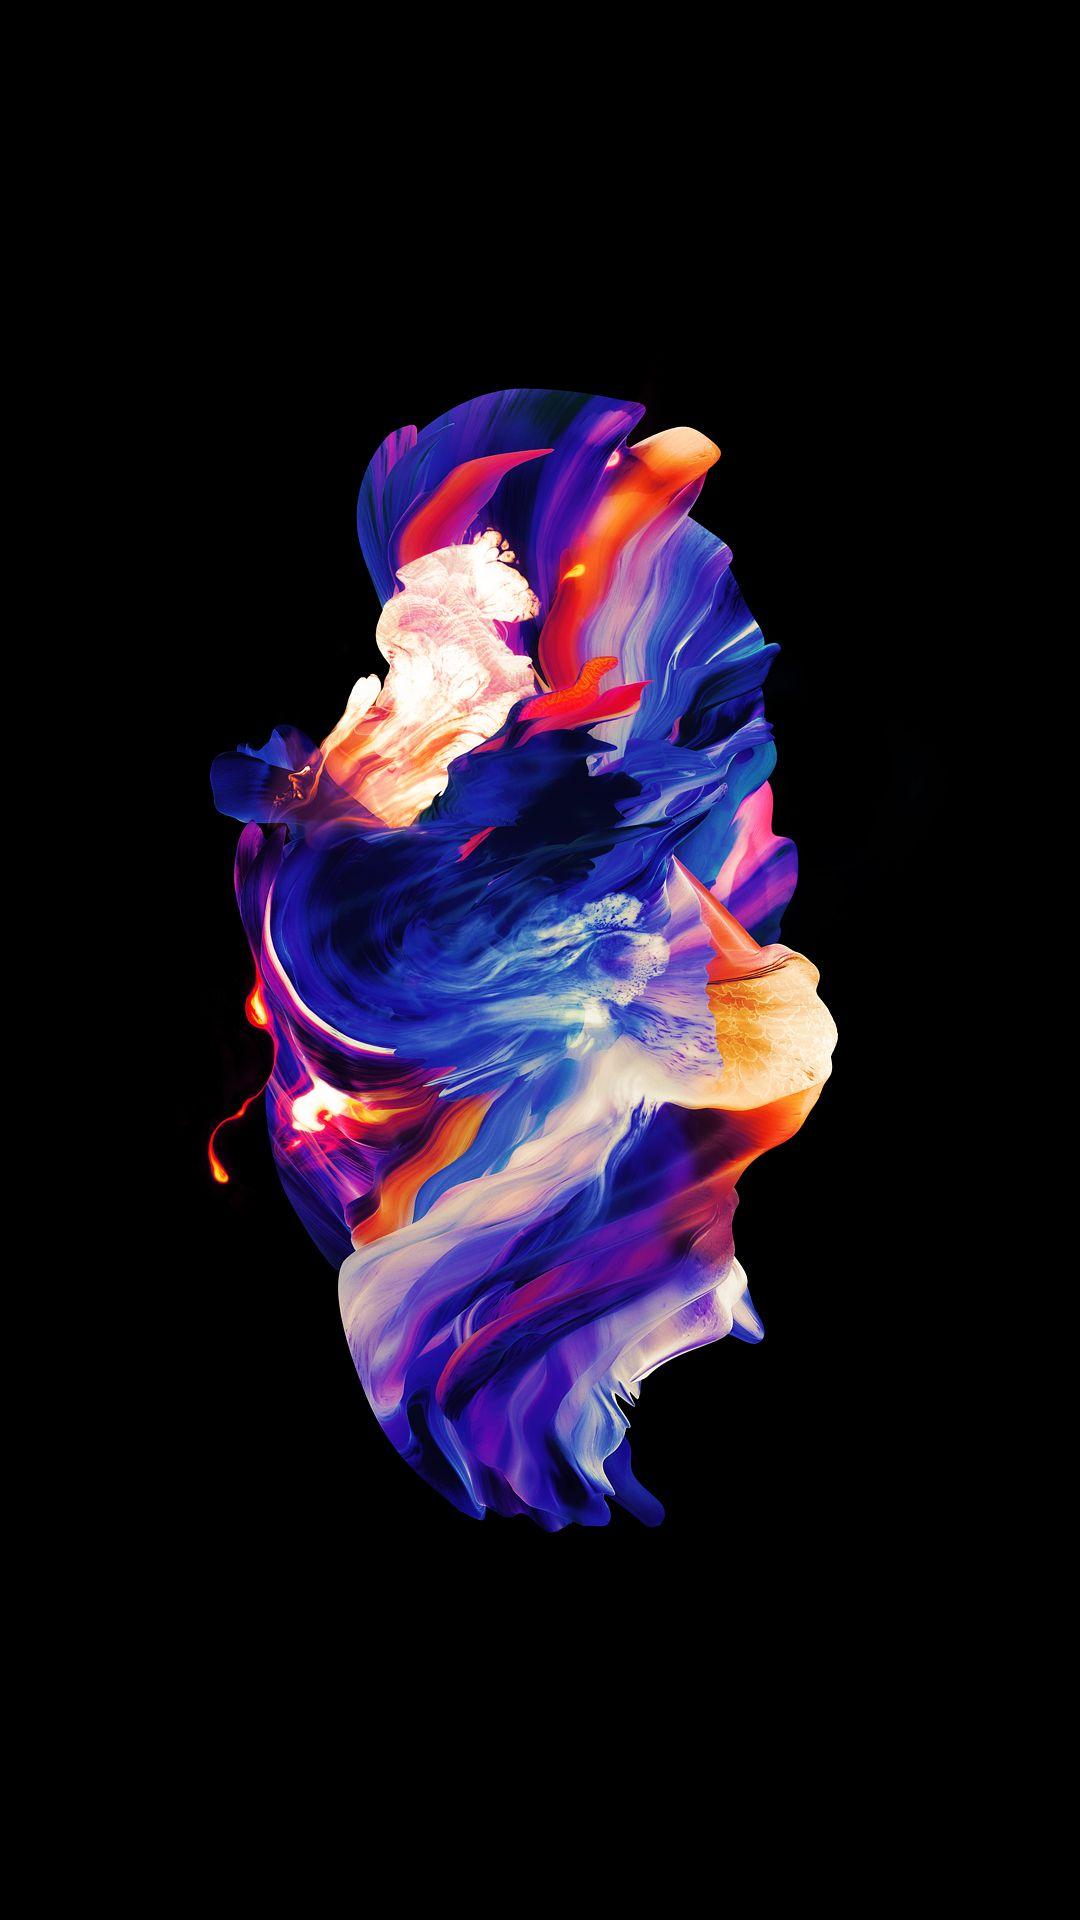 Download the official wallpaper from the OnePlus 5